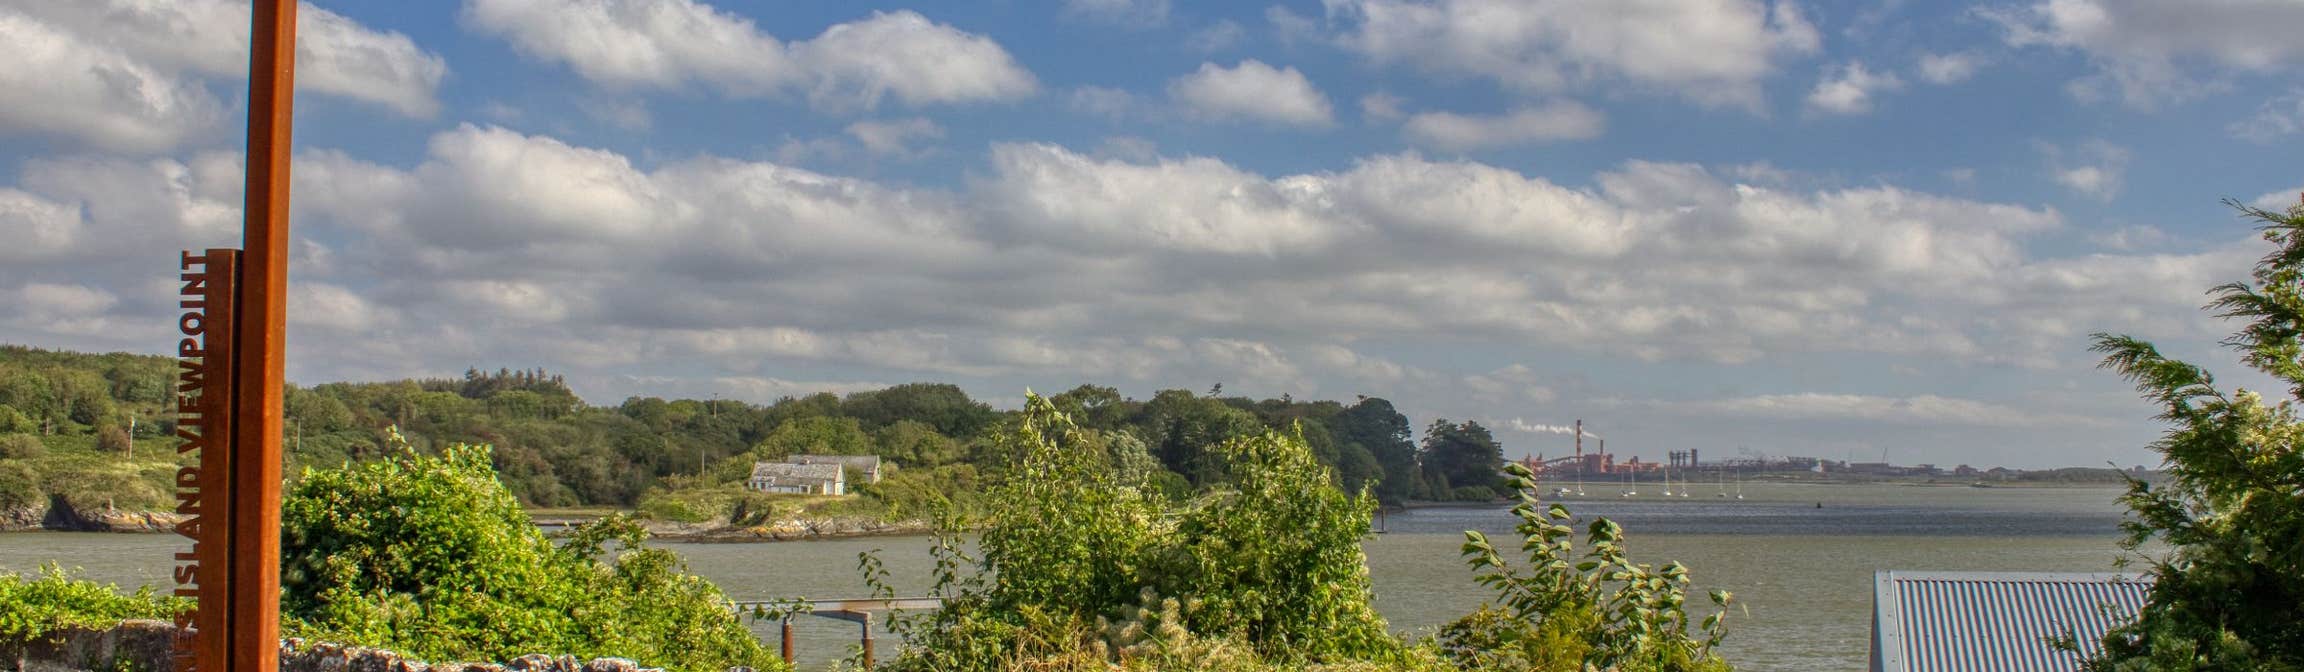 Image of Foynes in County Limerick